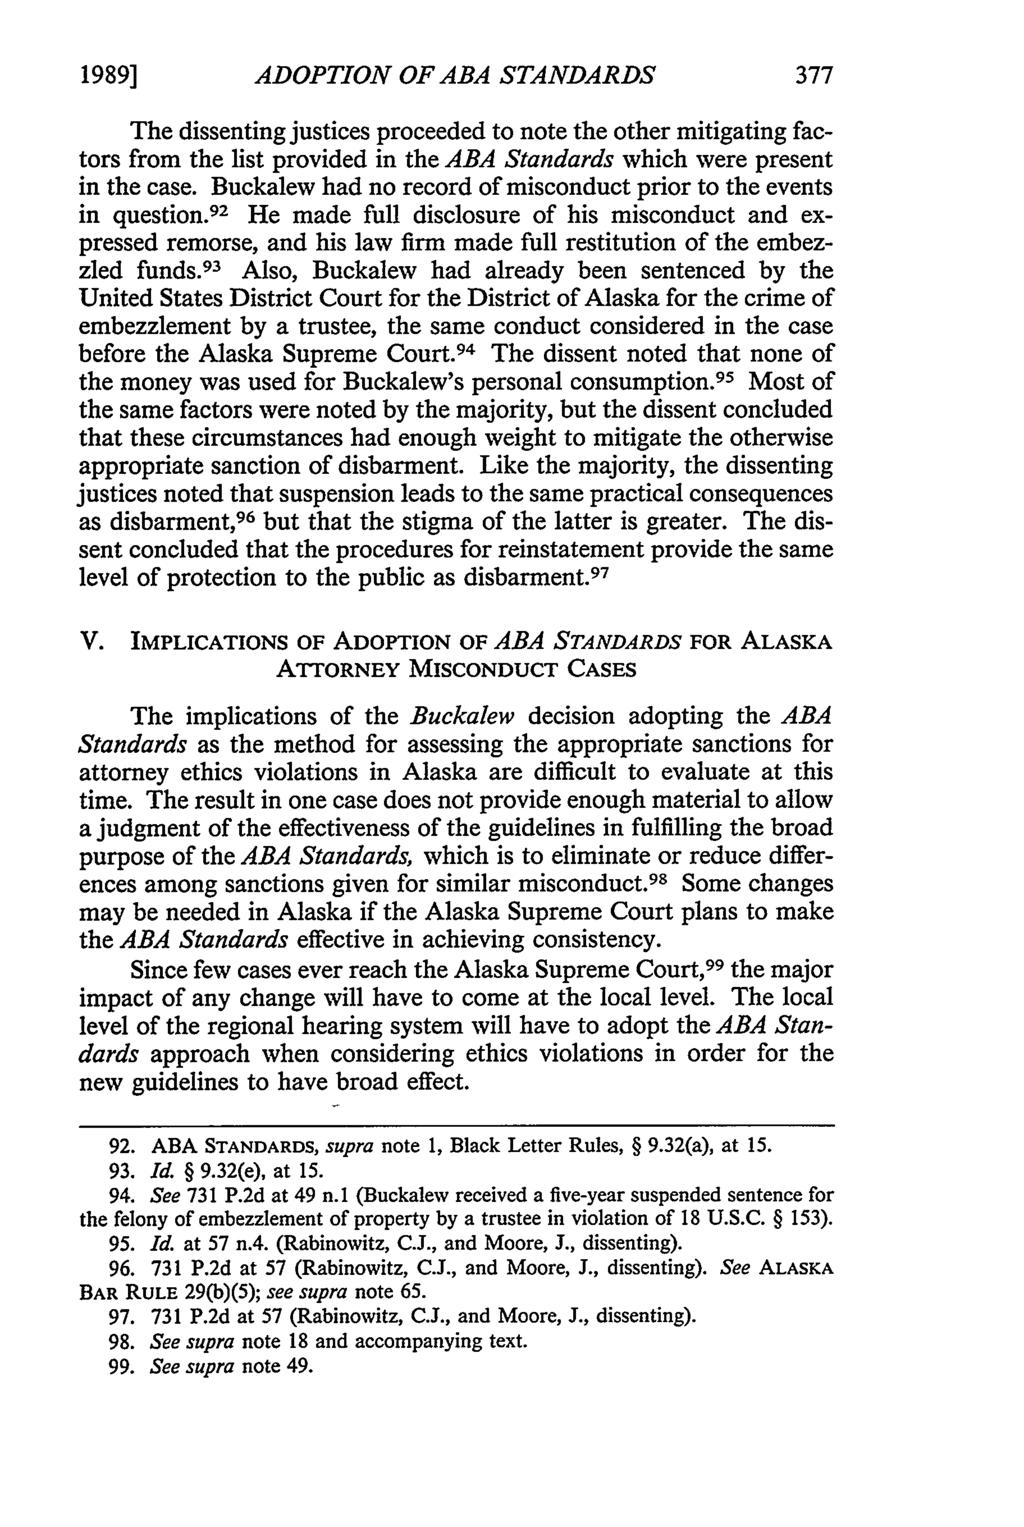 1989] ADOPTION OF ABA STANDARDS The dissenting justices proceeded to note the other mitigating factors from the list provided in the ABA Standards which were present in the case.